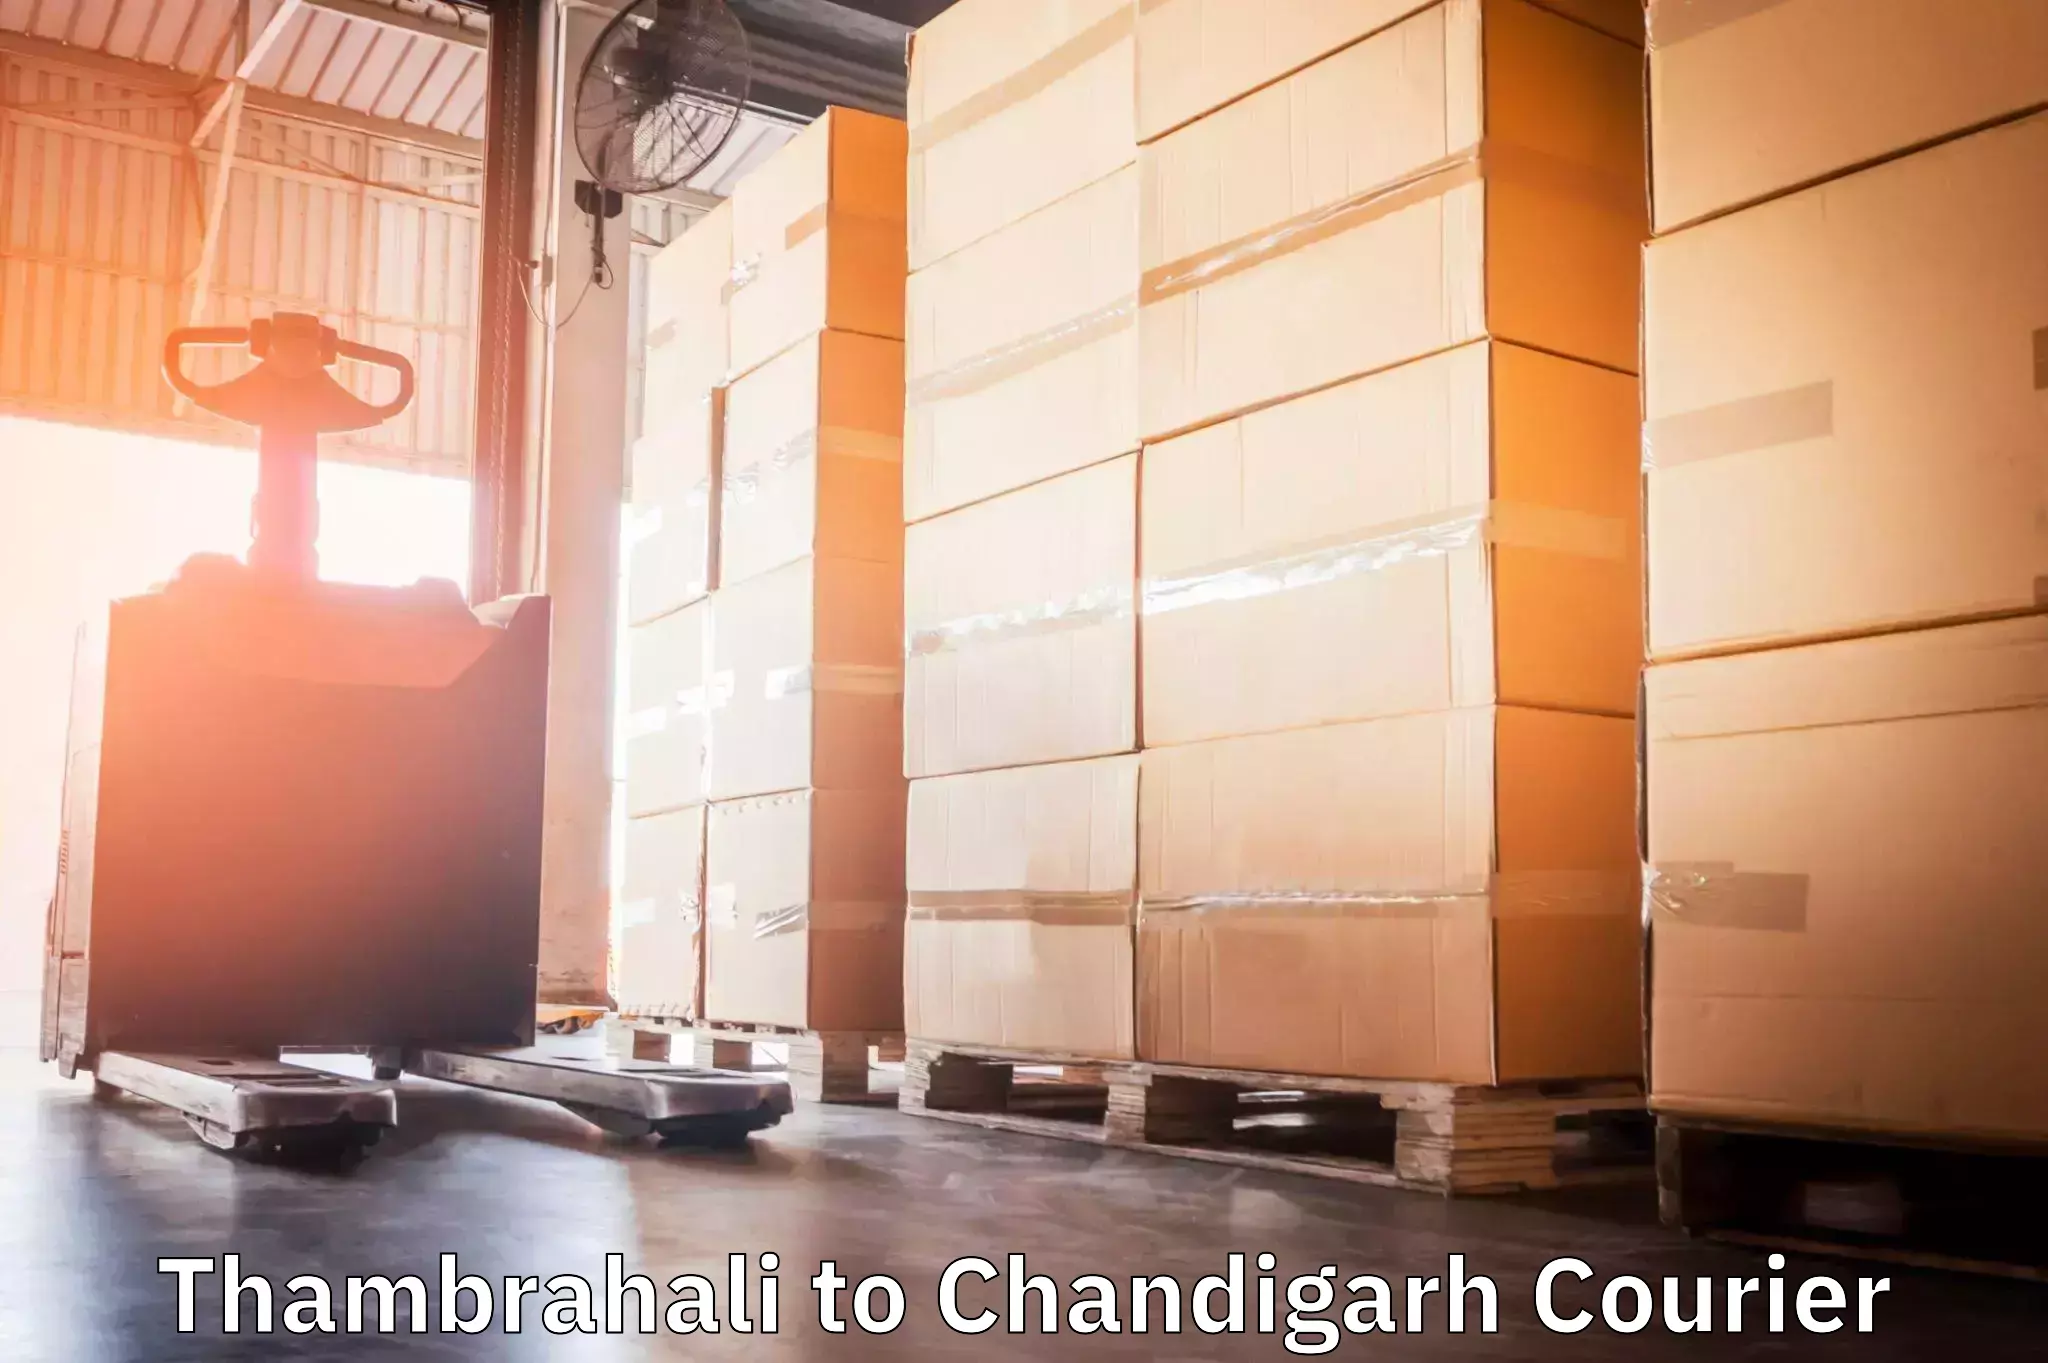 Advanced delivery solutions Thambrahali to Chandigarh